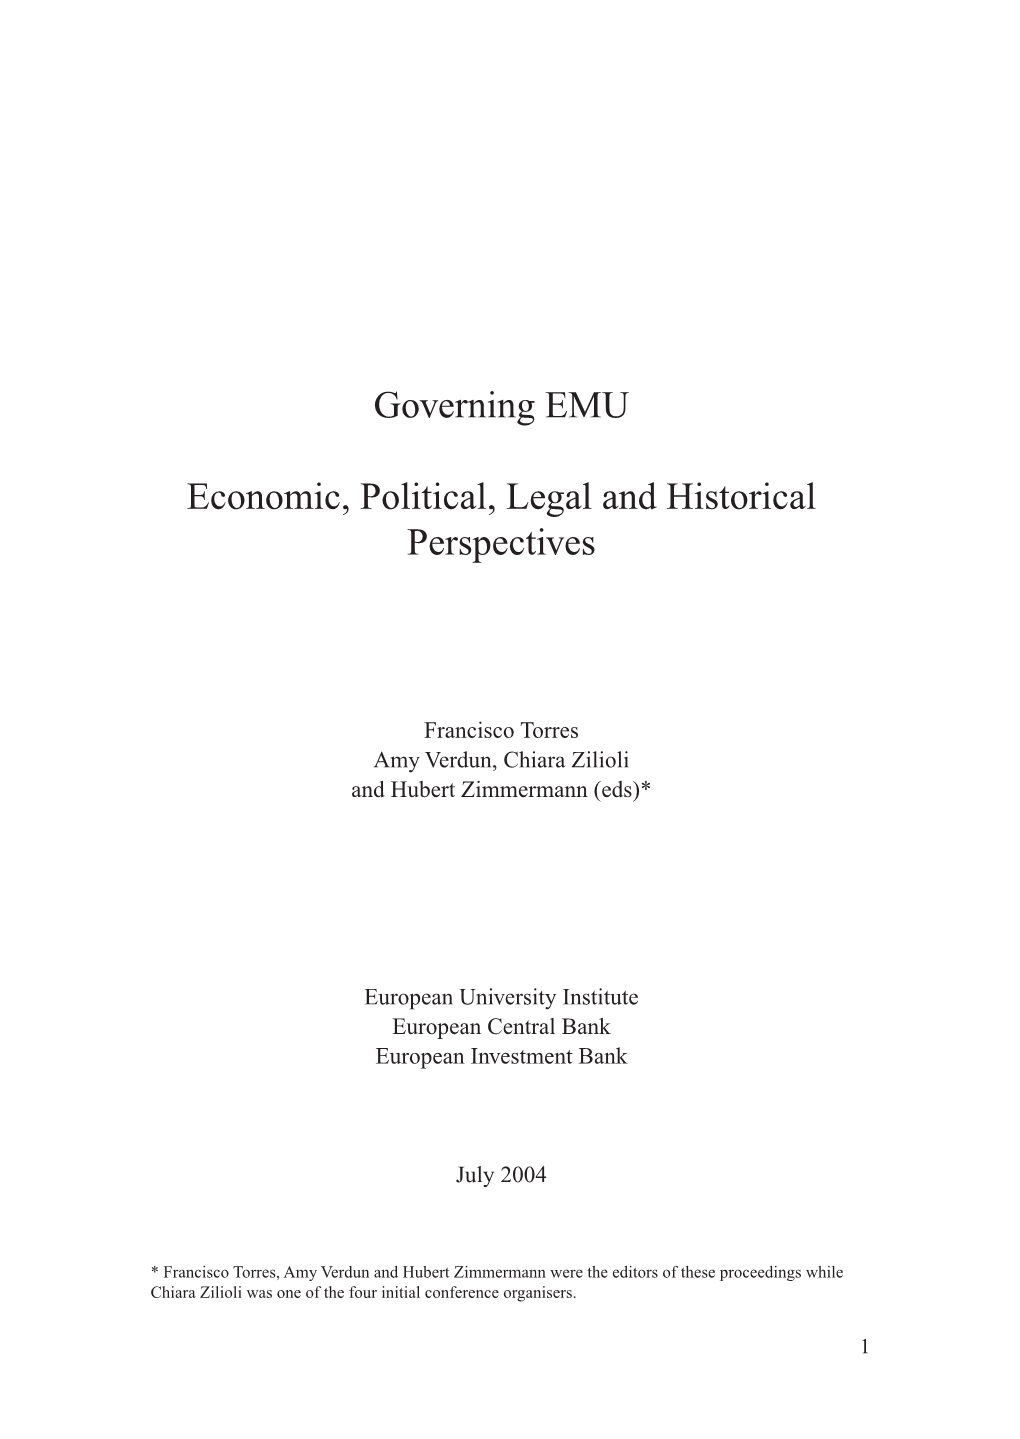 Governing EMU Economic, Political, Legal and Historical Perspectives